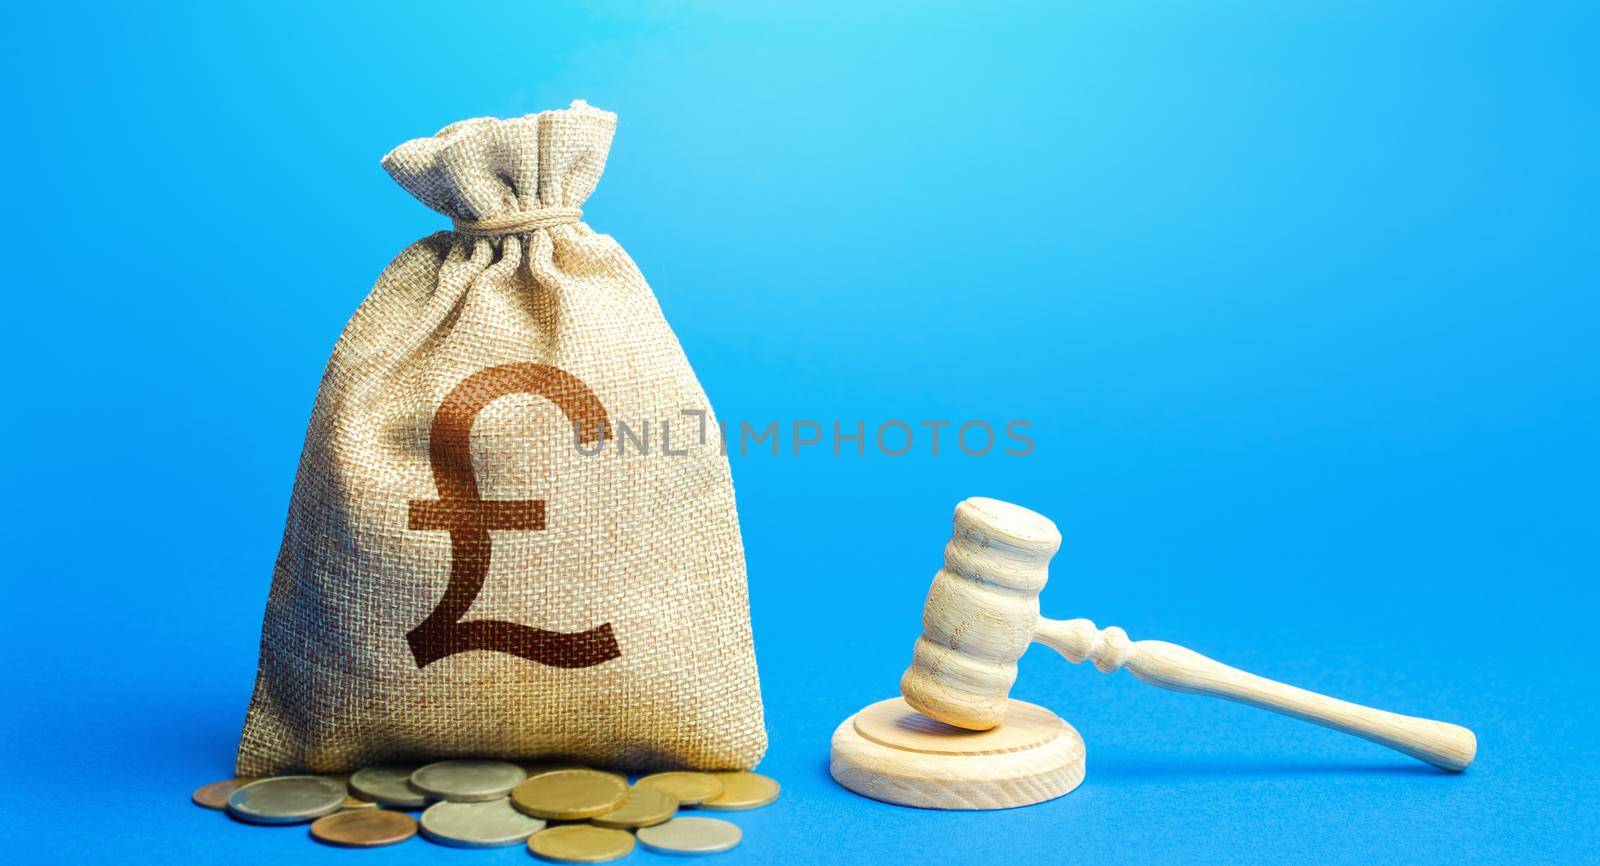 British pound sterling money bag and judge's gavel. Litigation, dispute resolution, conflict of interest settlement. Awarding moral financial compensation. Protection rights. Justice. Lawyer services. by iLixe48